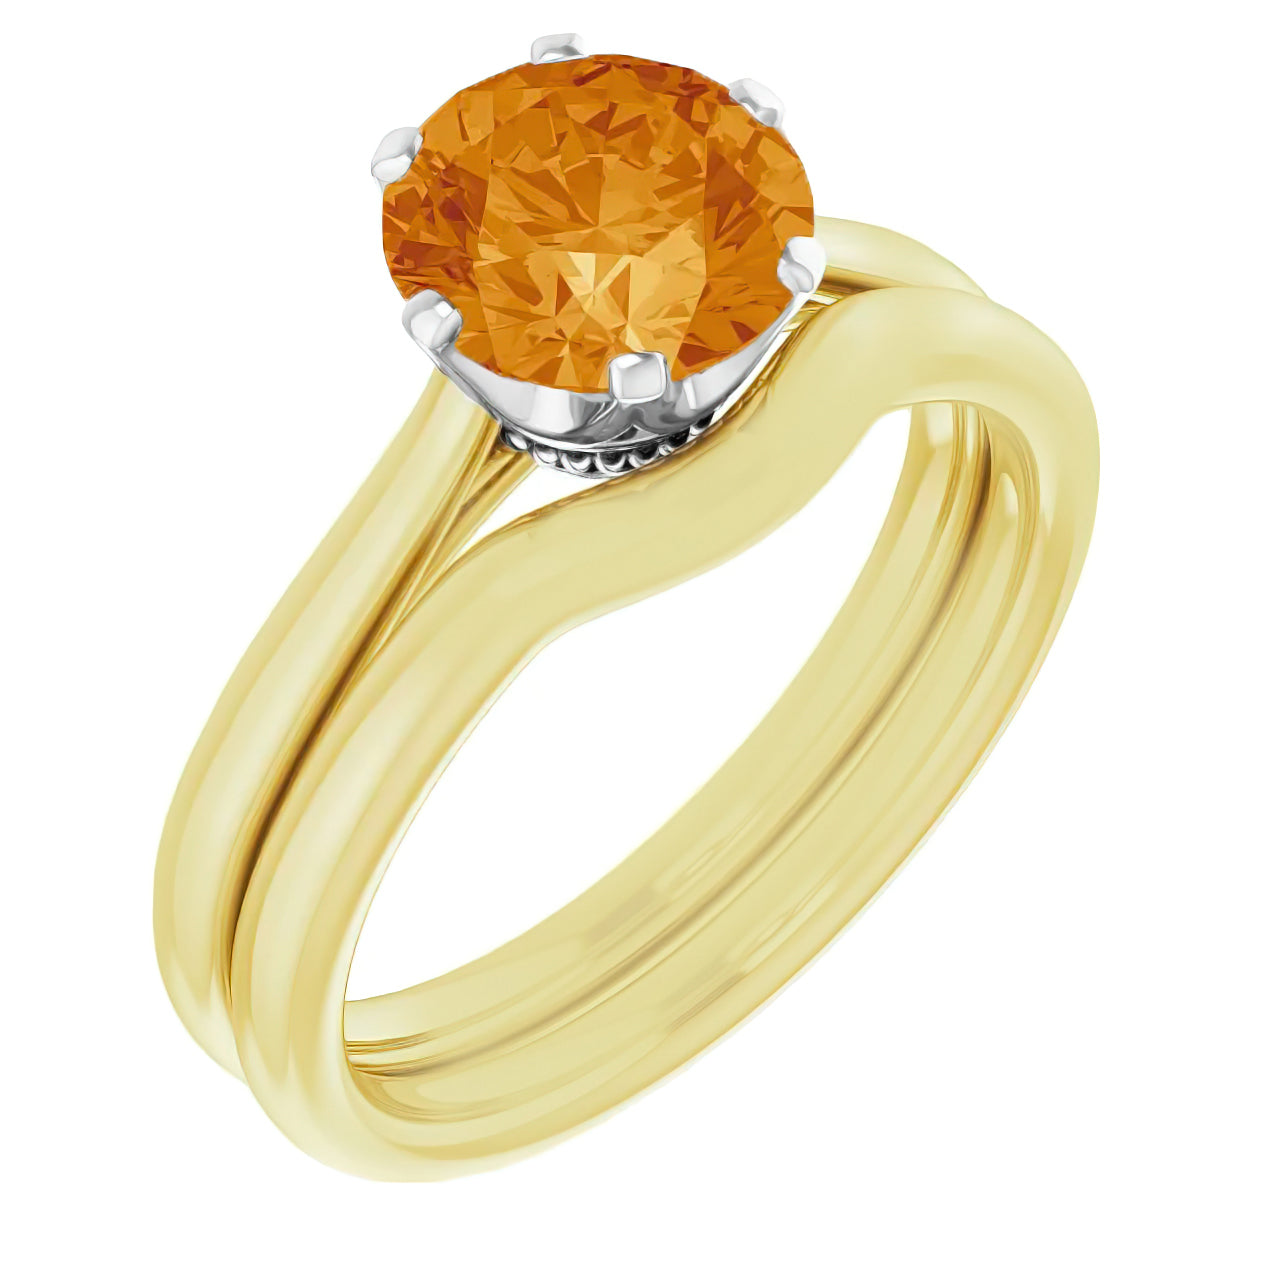 R102 Citrine Solitaire Engagement Ring with Matching Yellow Gold Hugger Band - R102